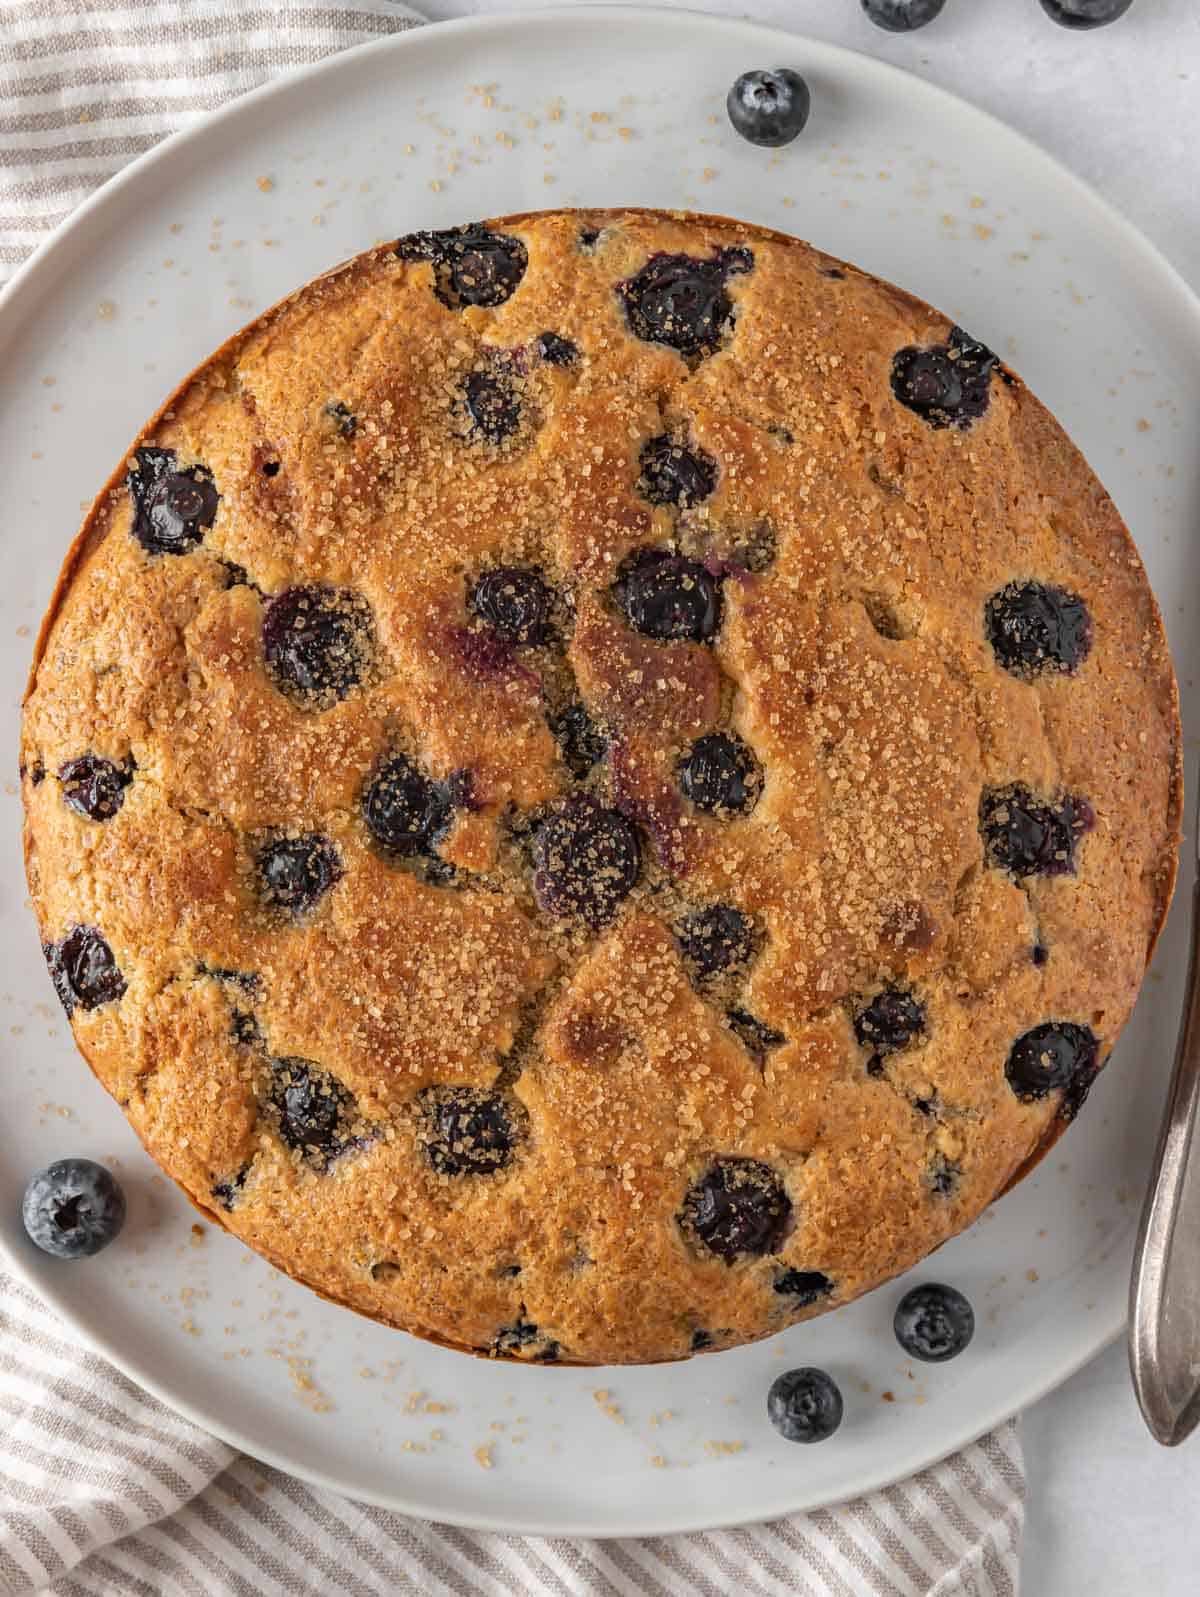 Whole blueberry muffin cake on a platter.